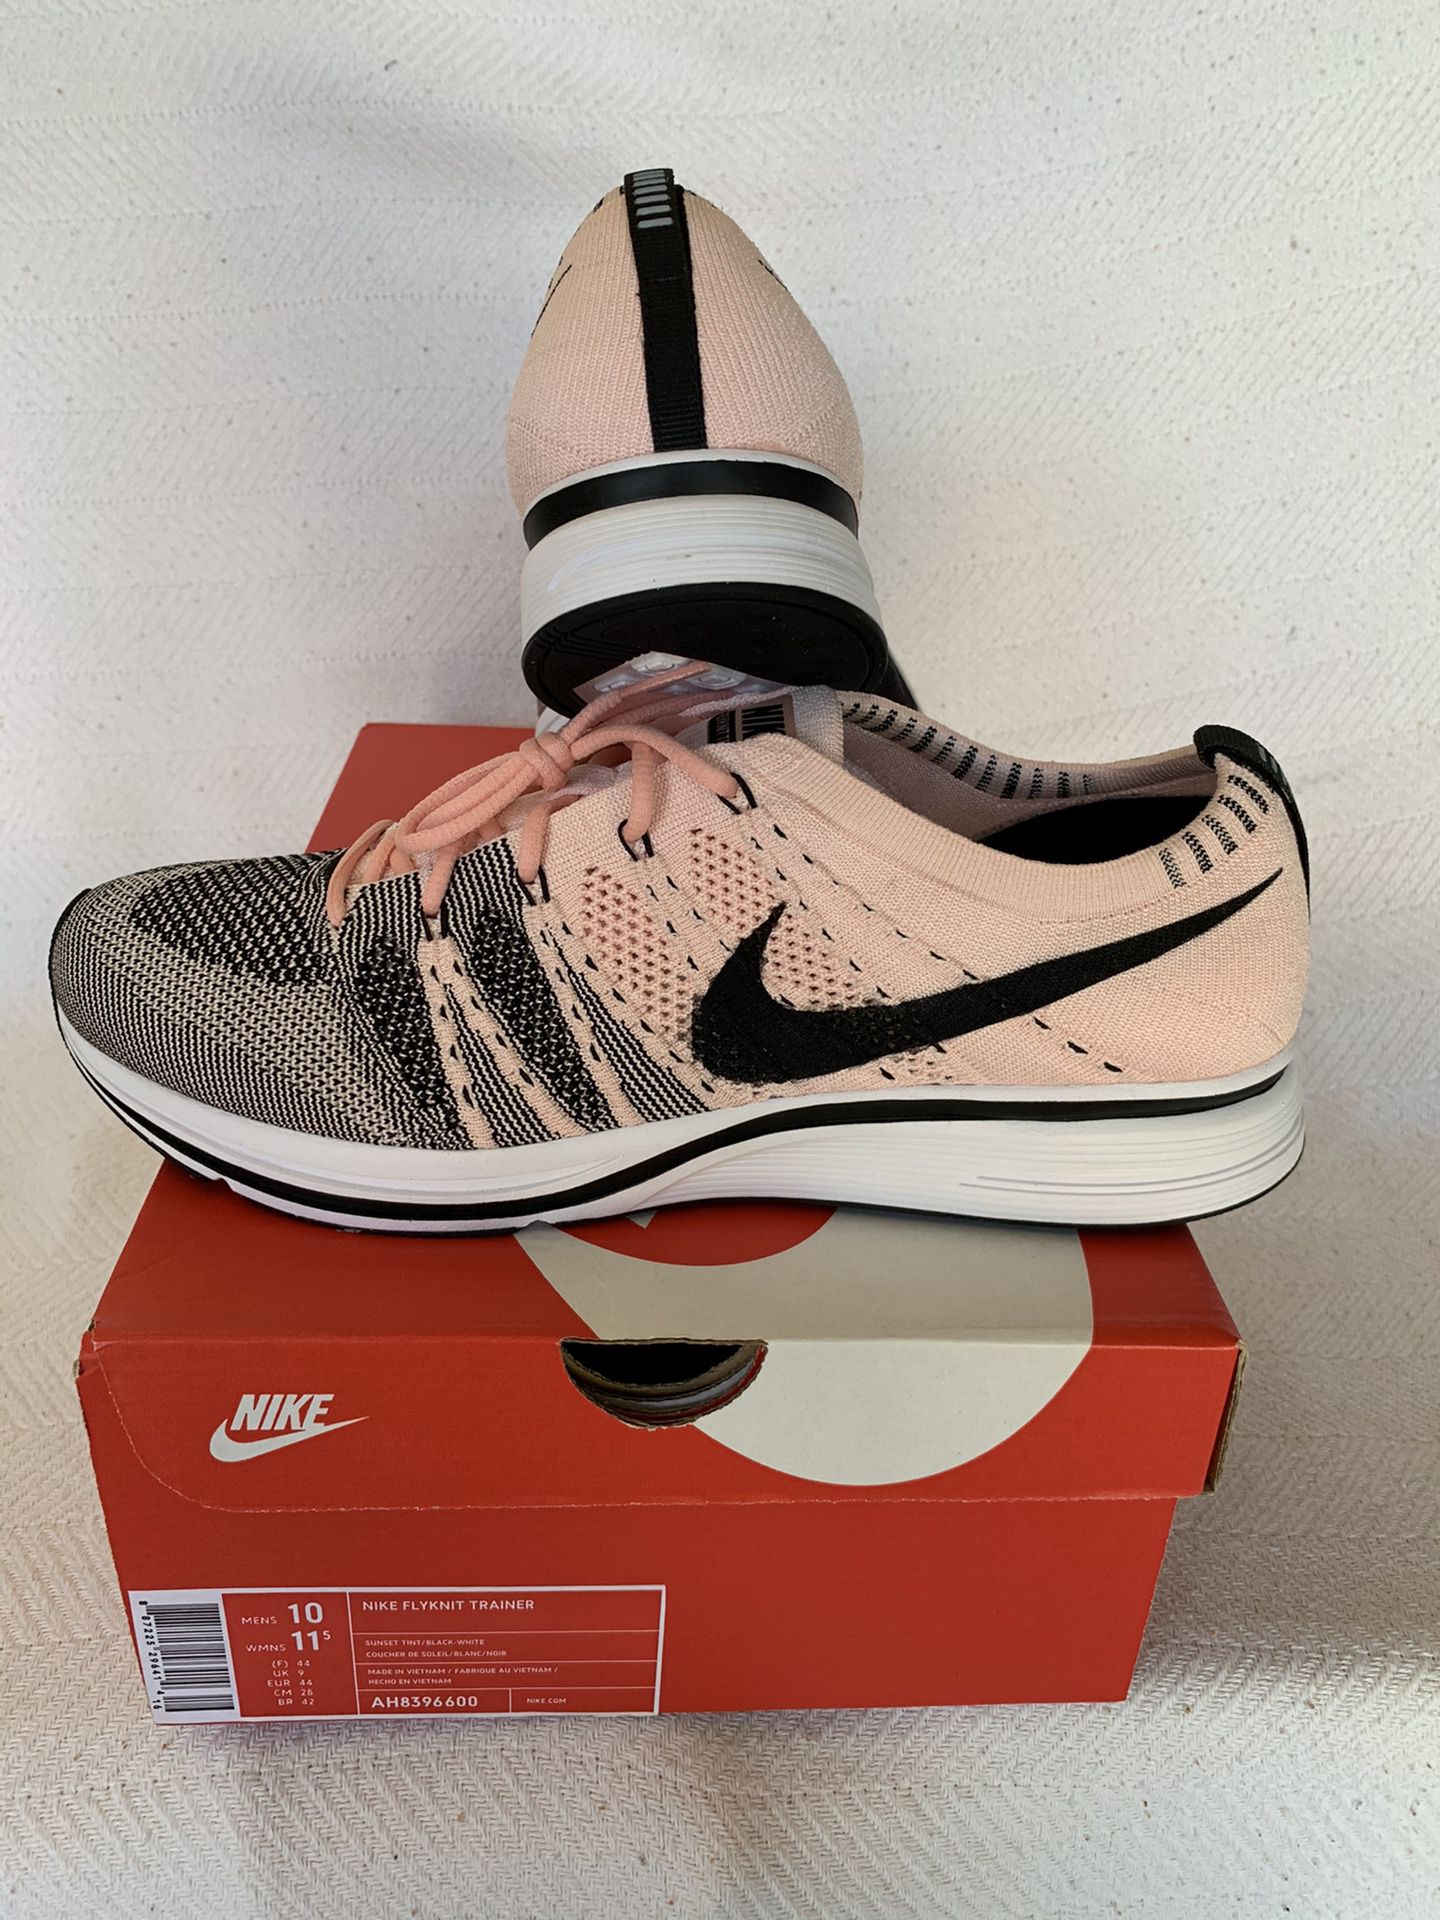 sensibilidad diagonal escaramuza Flyknit Trainer Sunset Tint Size 10 2017 for Sale in Los Angeles, CA -  OfferUp